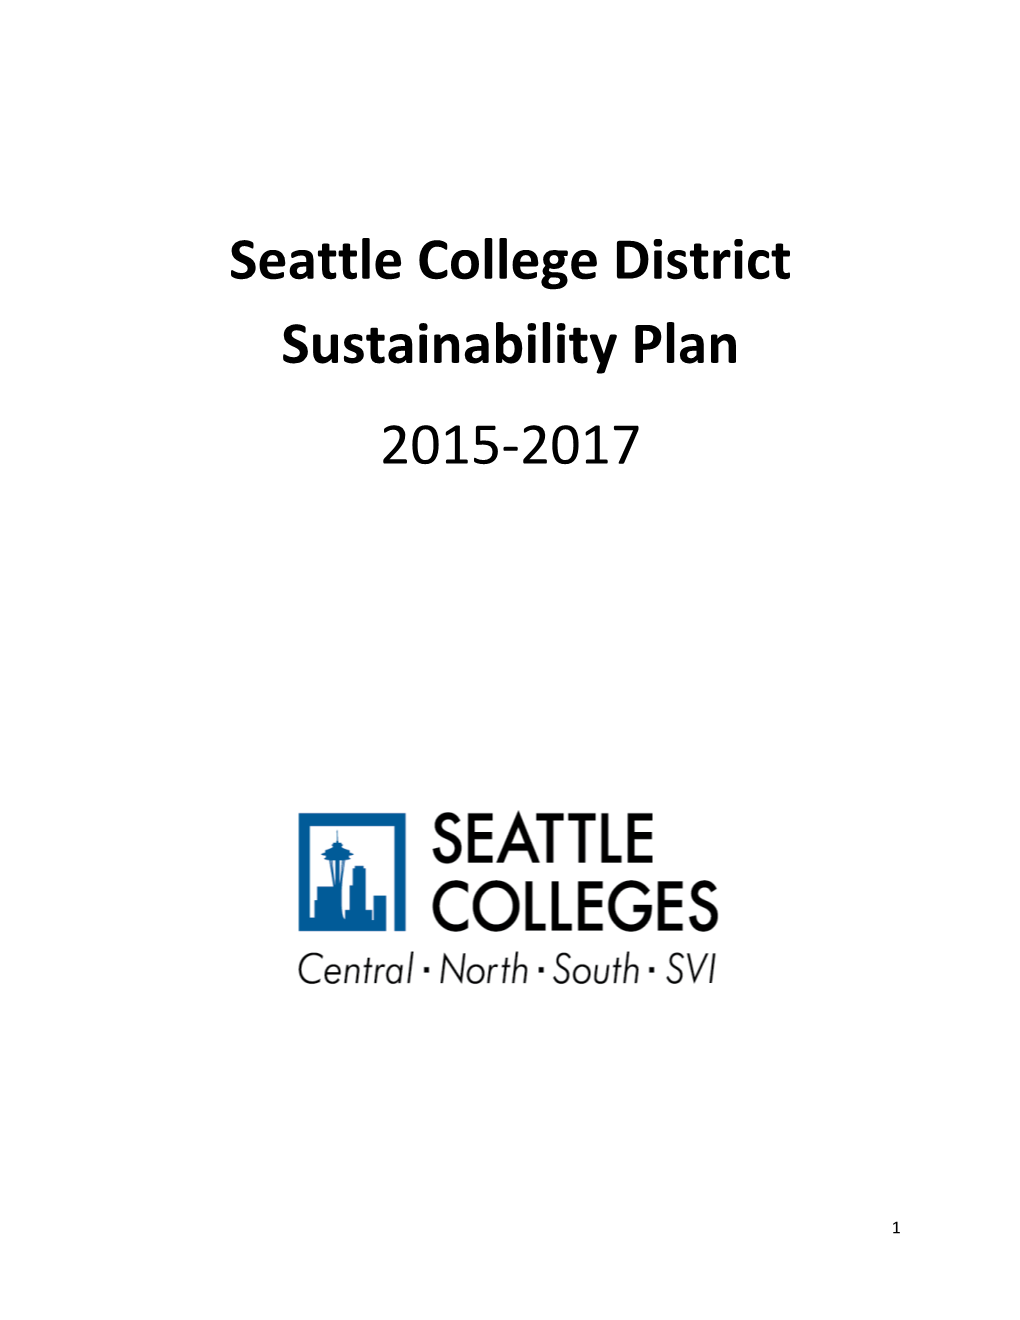 Seattle College District Sustainability Plan